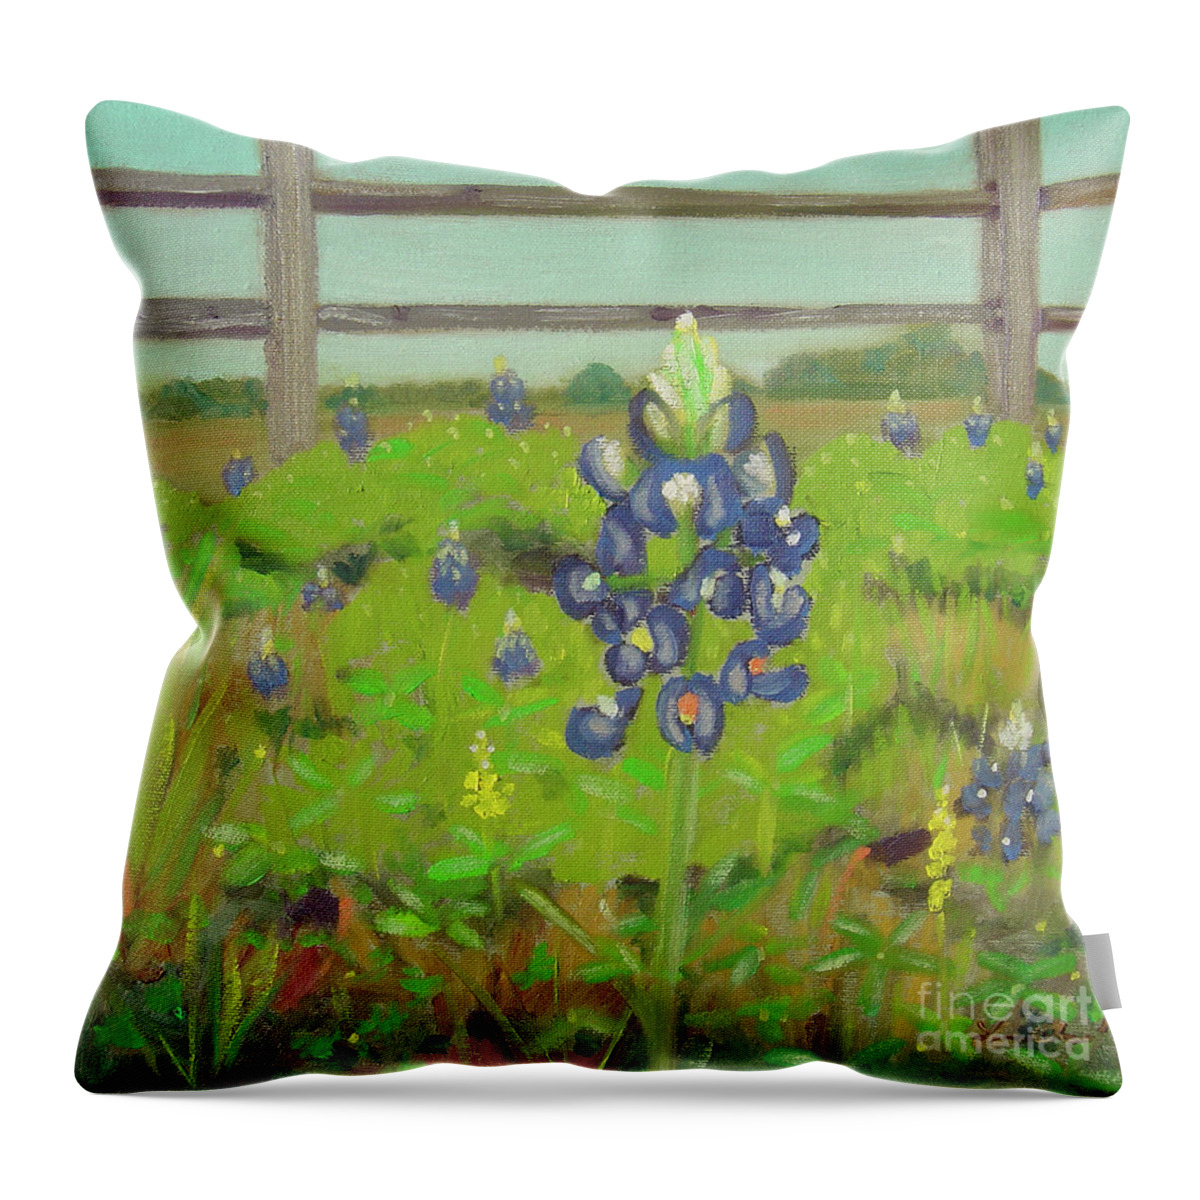 Bluebonnet Throw Pillow featuring the painting One in a Crowd by Lilibeth Andre